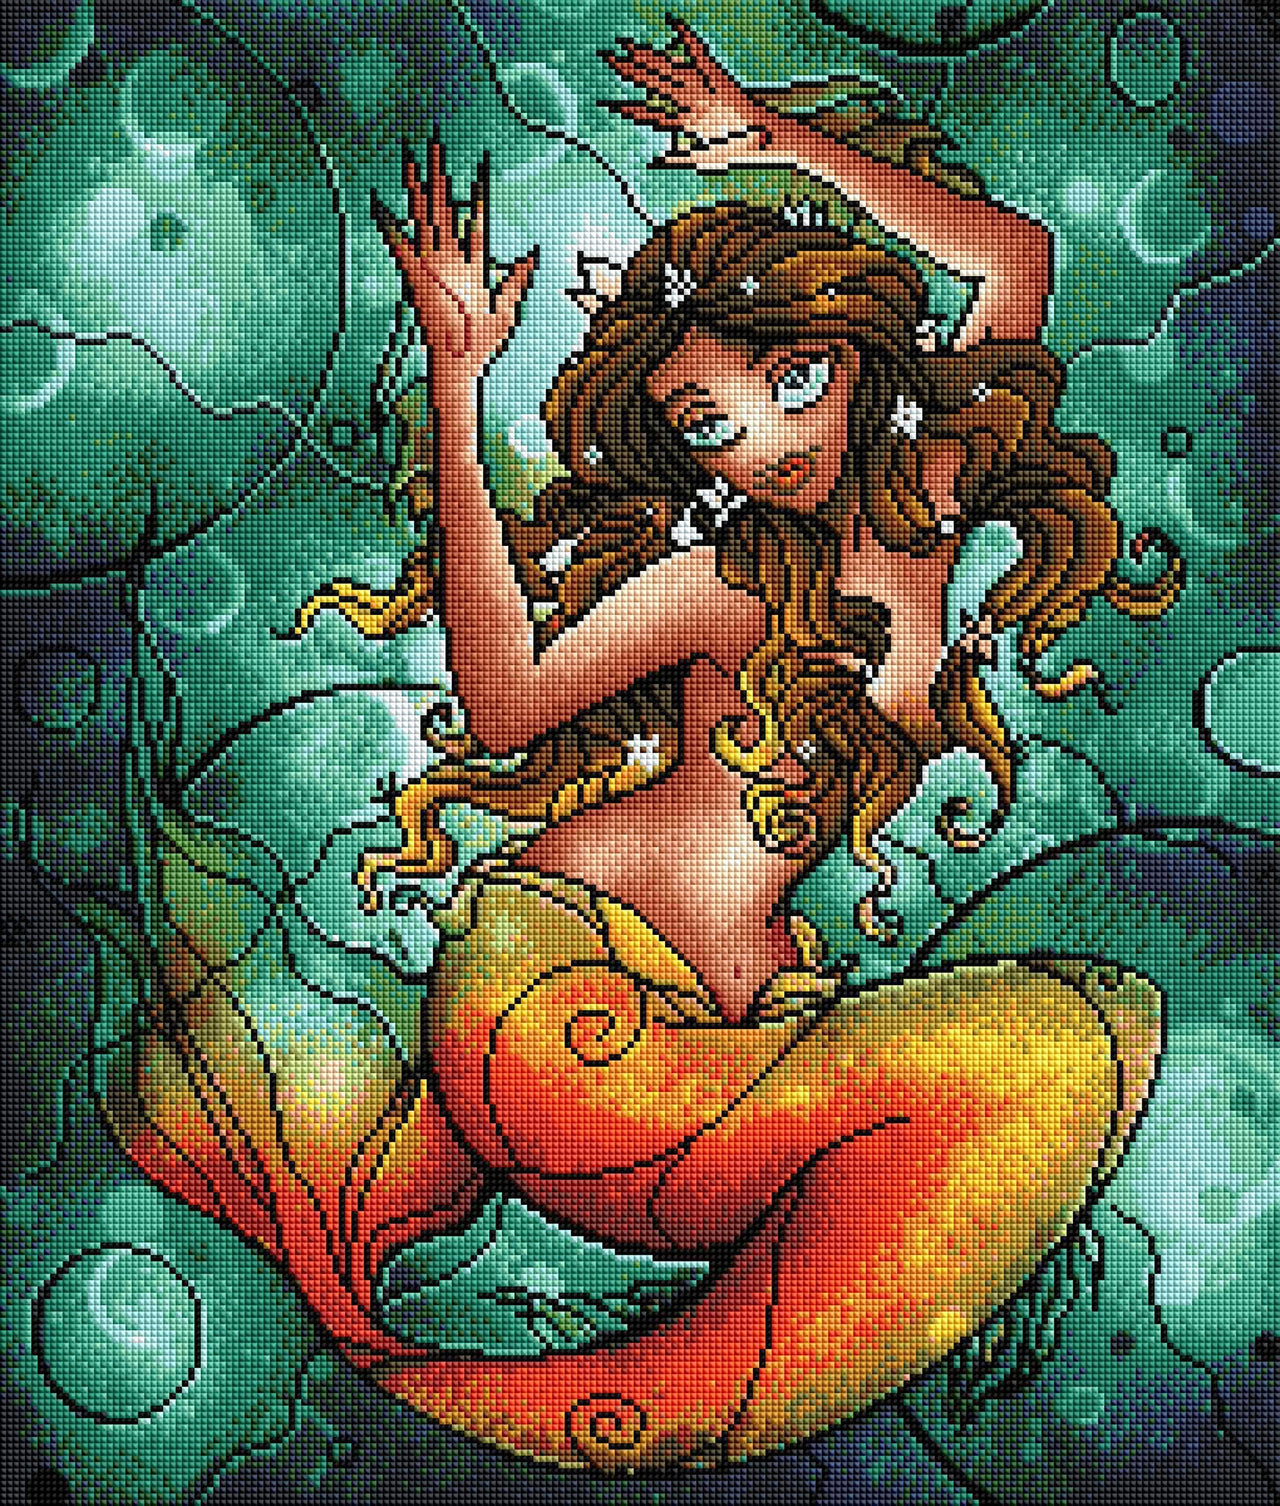 Diamond Painting The Trapped Siren 20.5″ x 24.0″ (52cm x 61cm) / Square With 36 Colors / 48,963